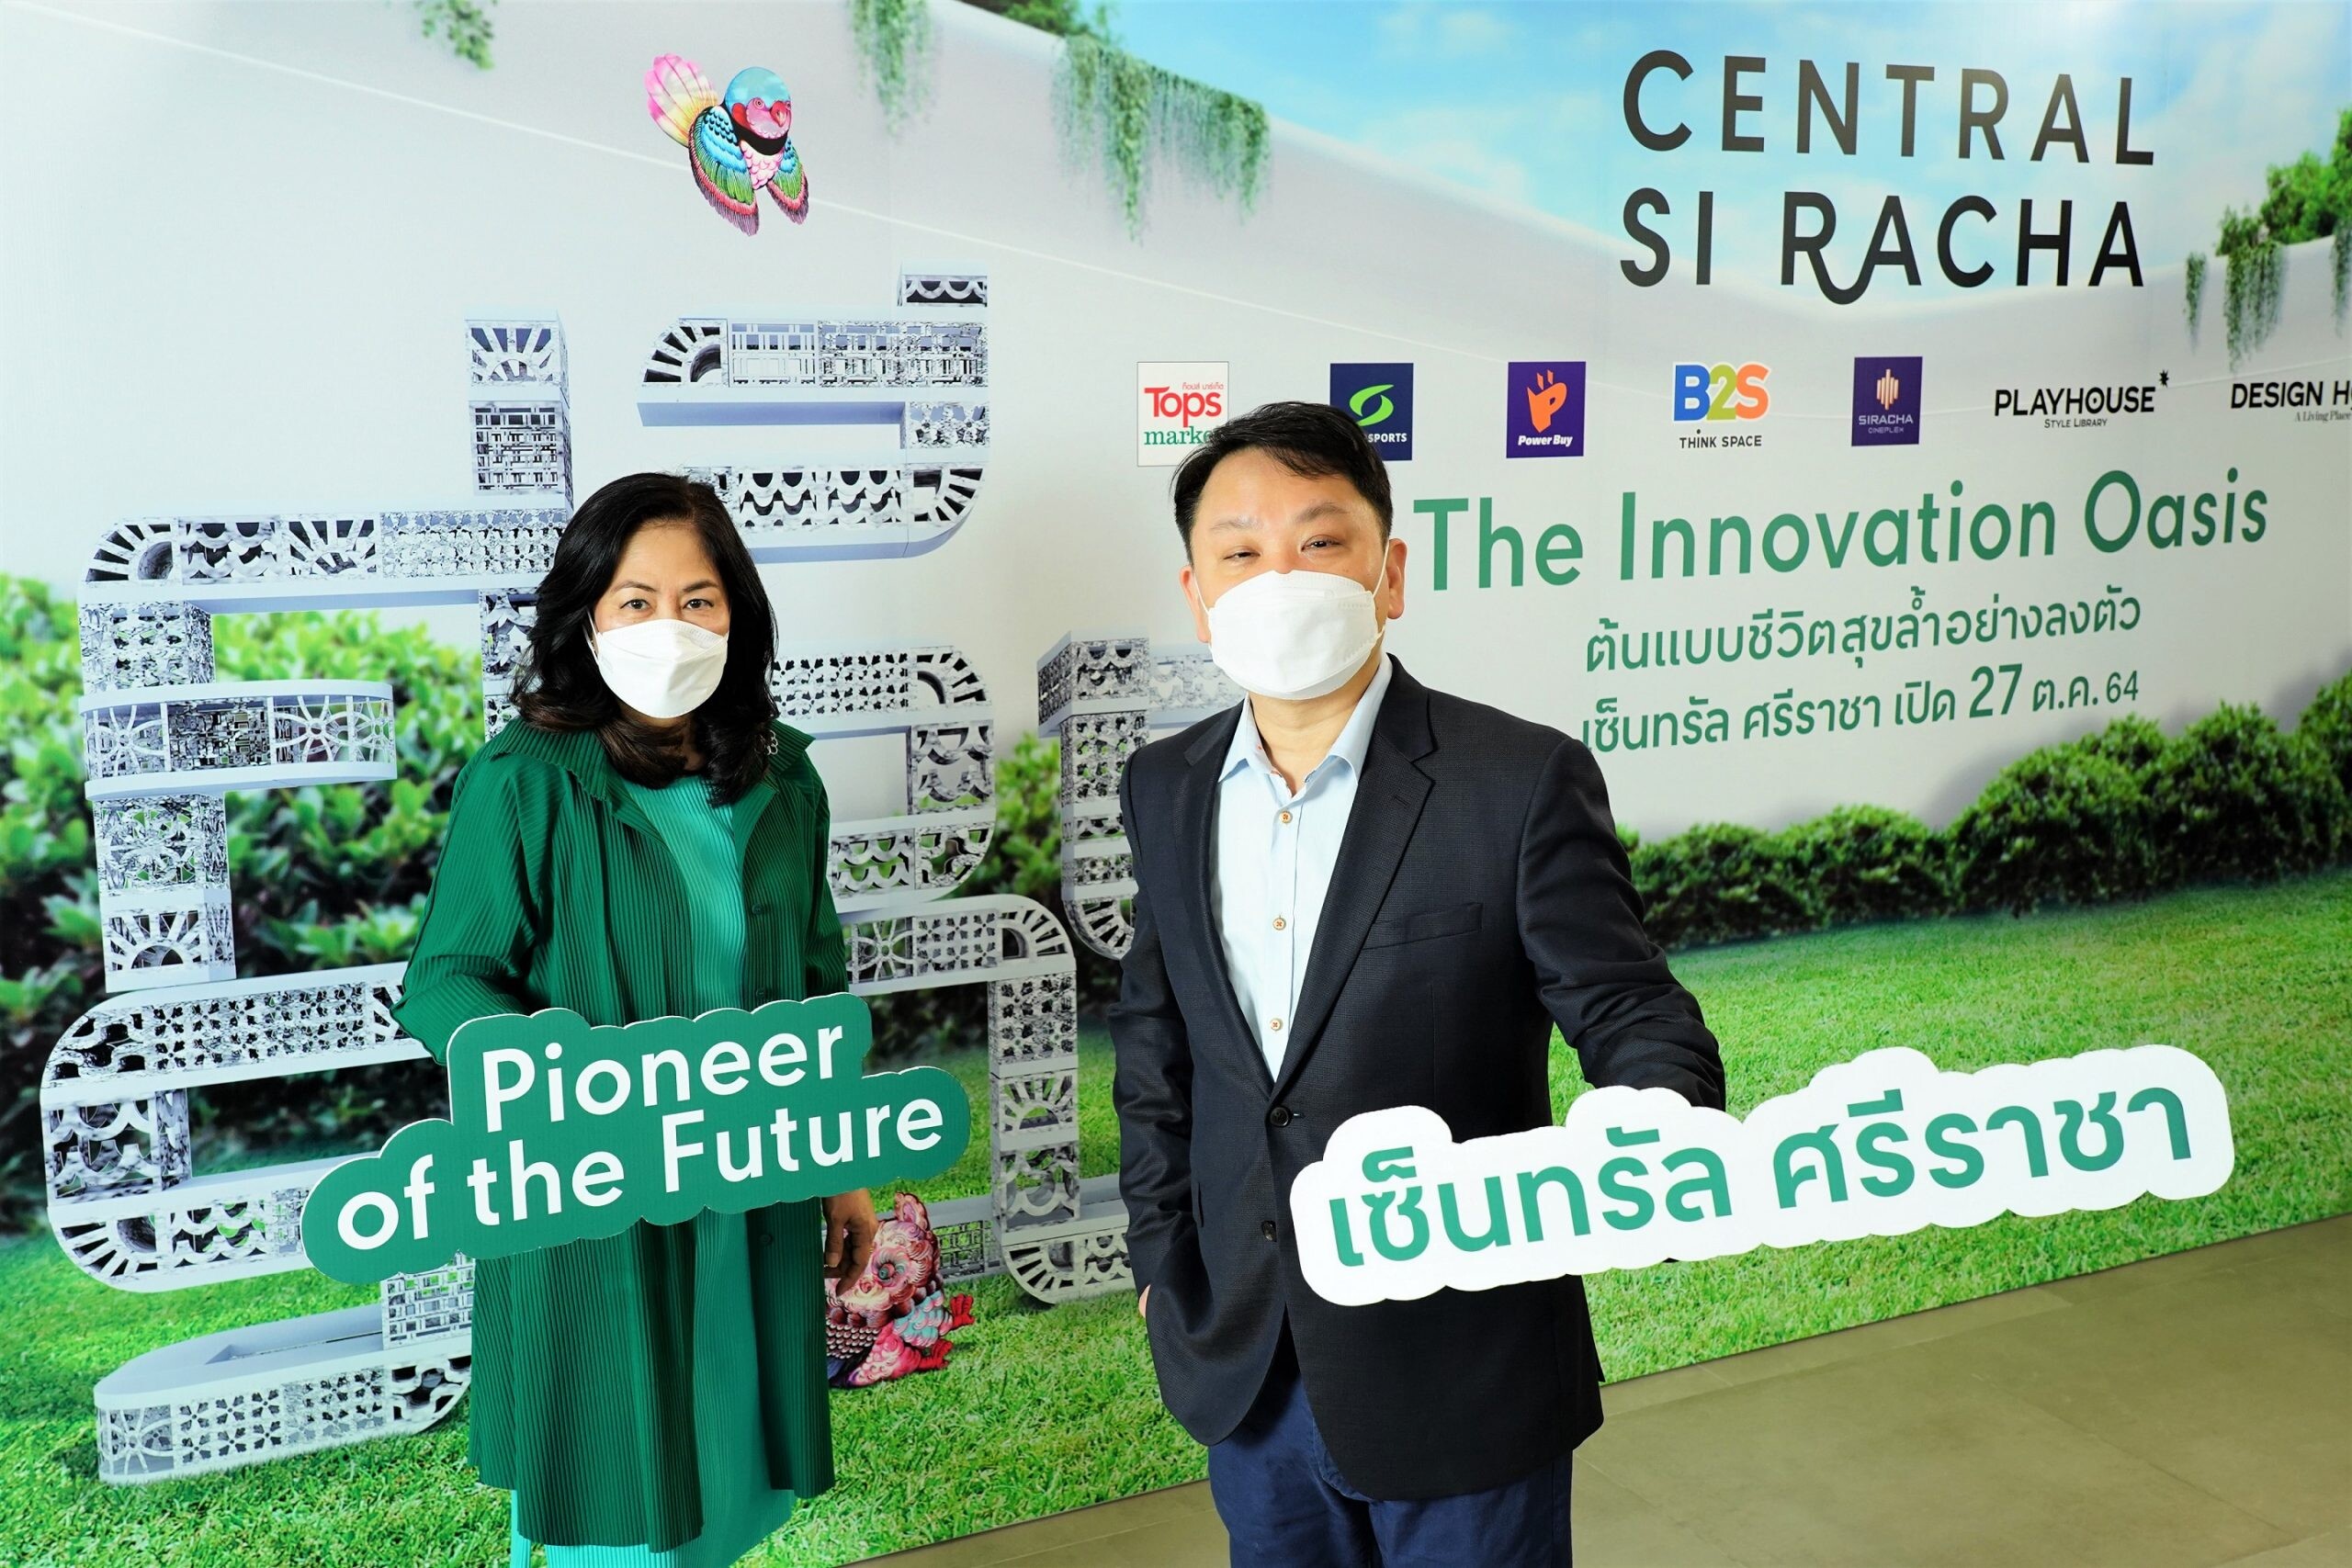 'Central Pattana' to launch 'Central Si Racha' on 27 Oct as the model mixed-use project of the future and the first eco-friendly mall in the region, aiming to create a downtown of EEC